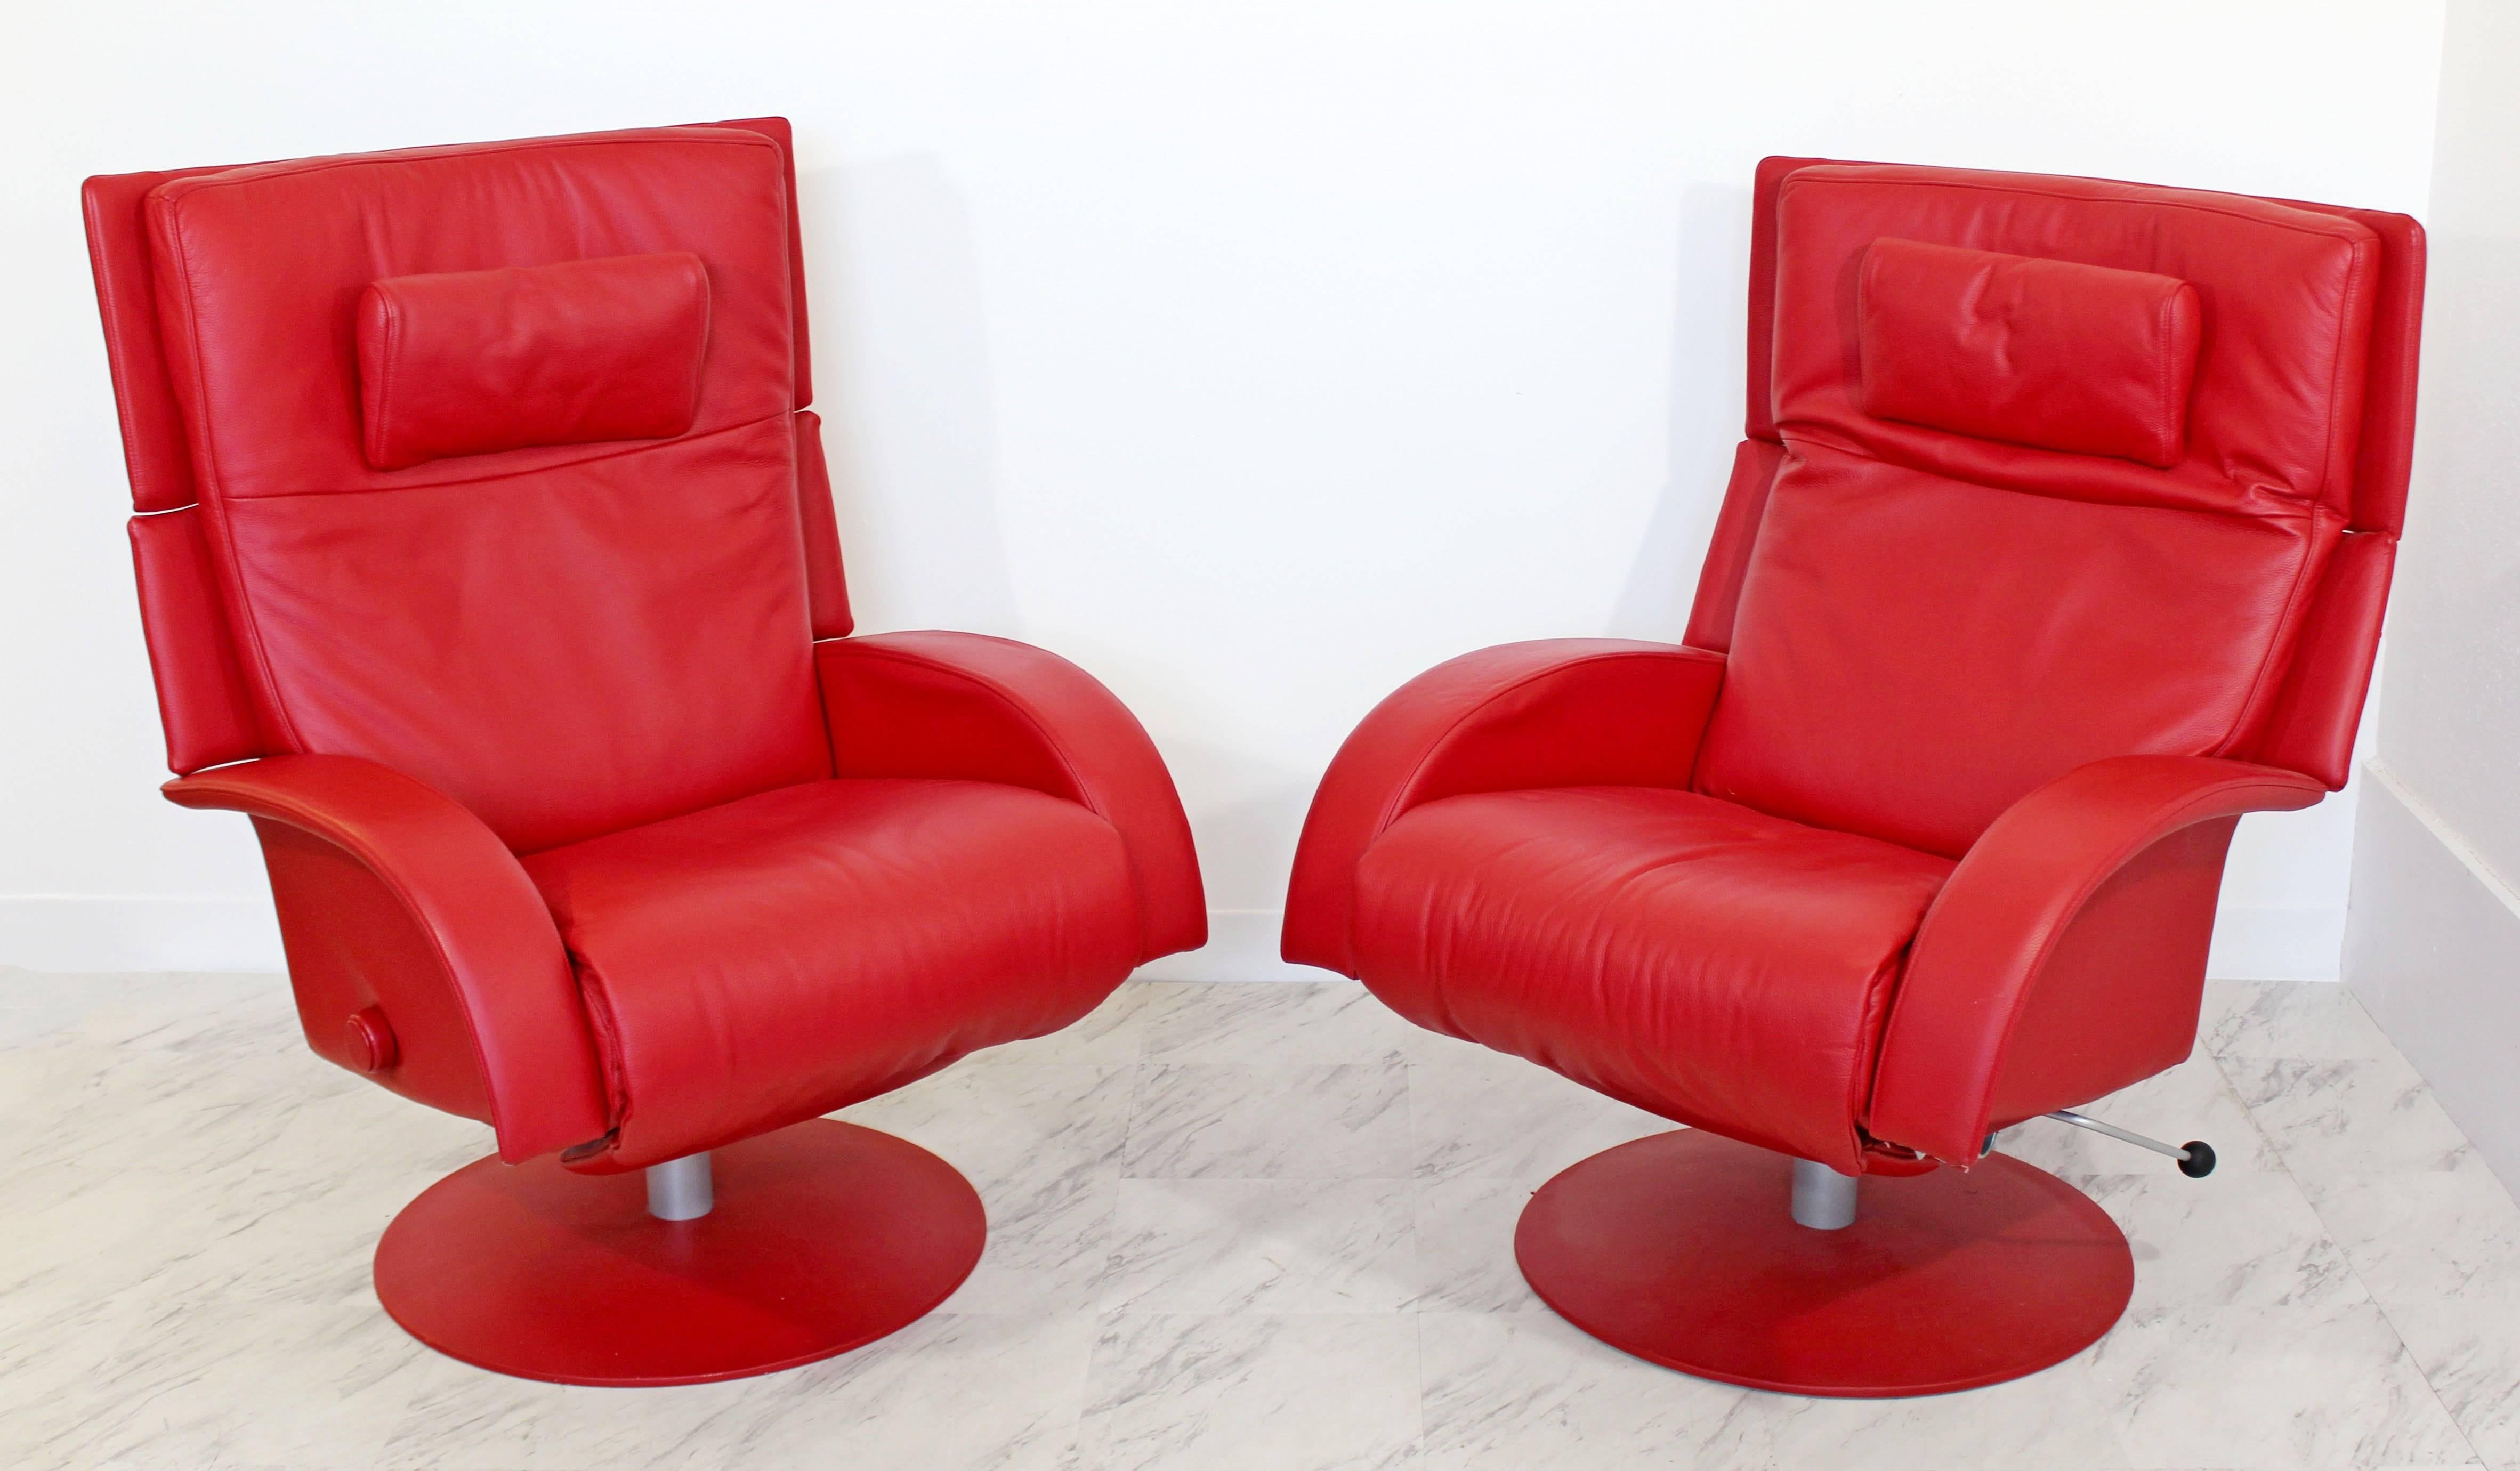 For your consideration is an utterly phenomenal pair of red leather, reclining lounge chairs by Lafer. The back both reclines and folds in and the foot rests pulls out and folds in. In excellent condition. The dimensions are 30